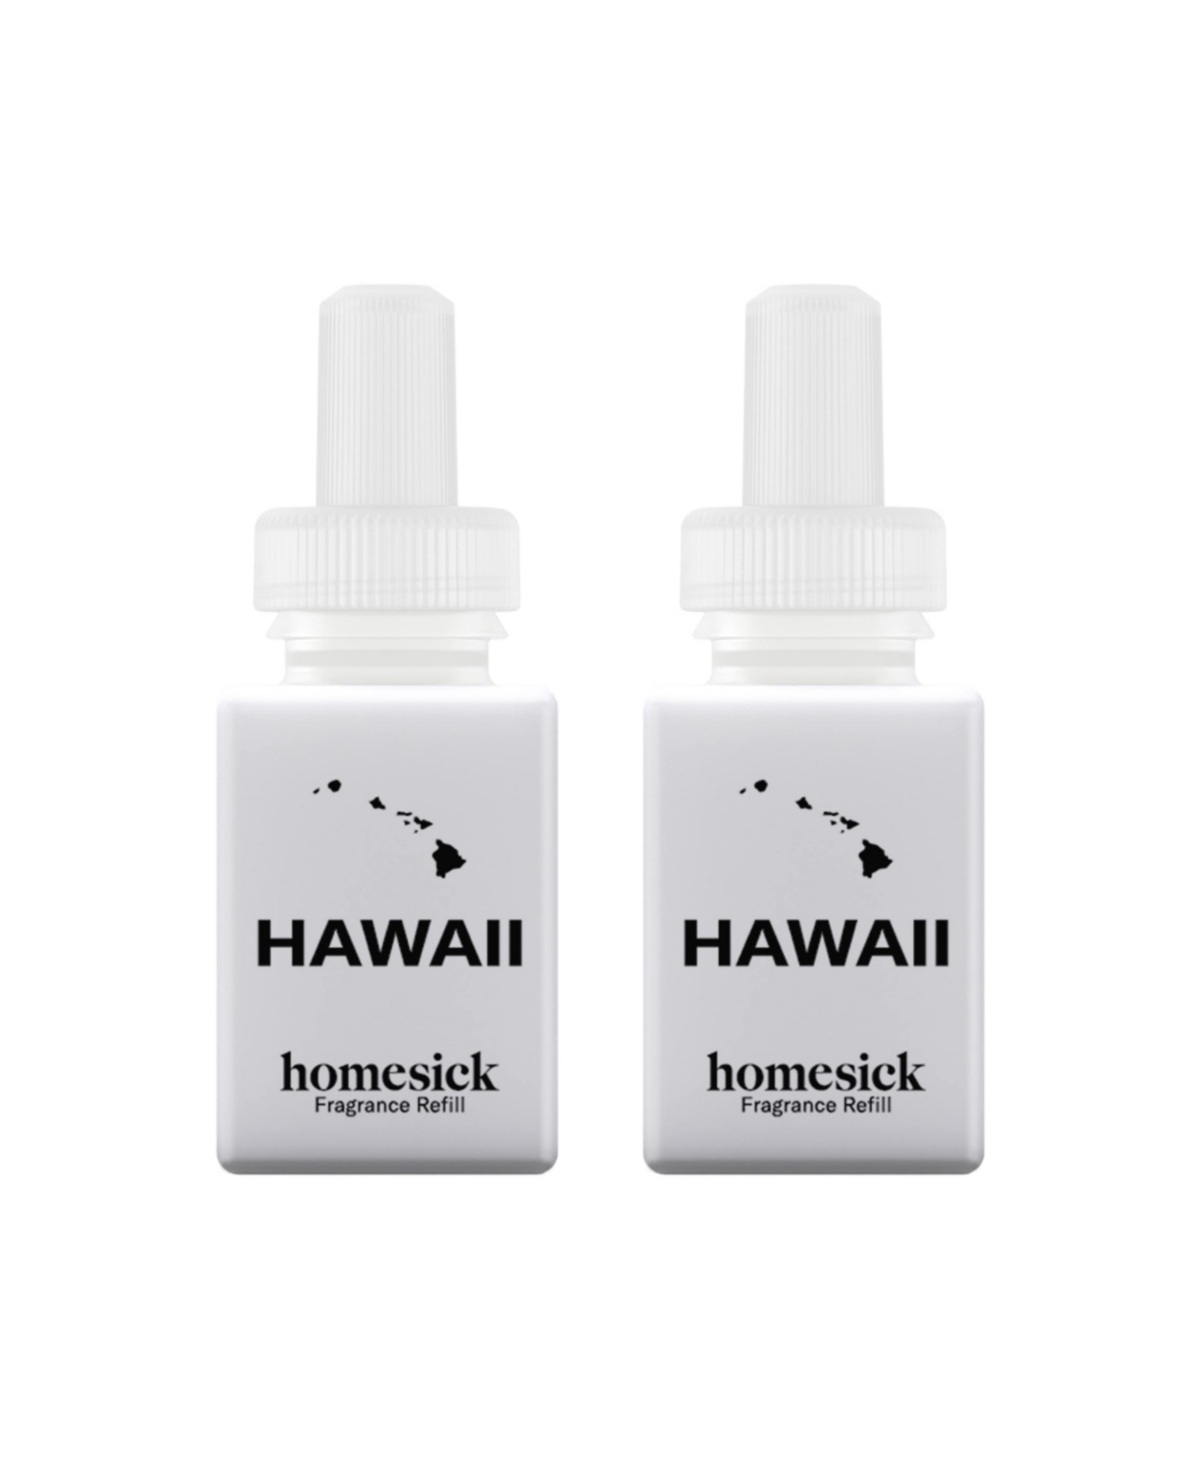 Homesick Home Scent Refill - Hawaii - Smart Home Air Diffuser Fragrance - Up to 120-Hours of Luxury Fragrance per Refill - Clean & Safe Diffuser